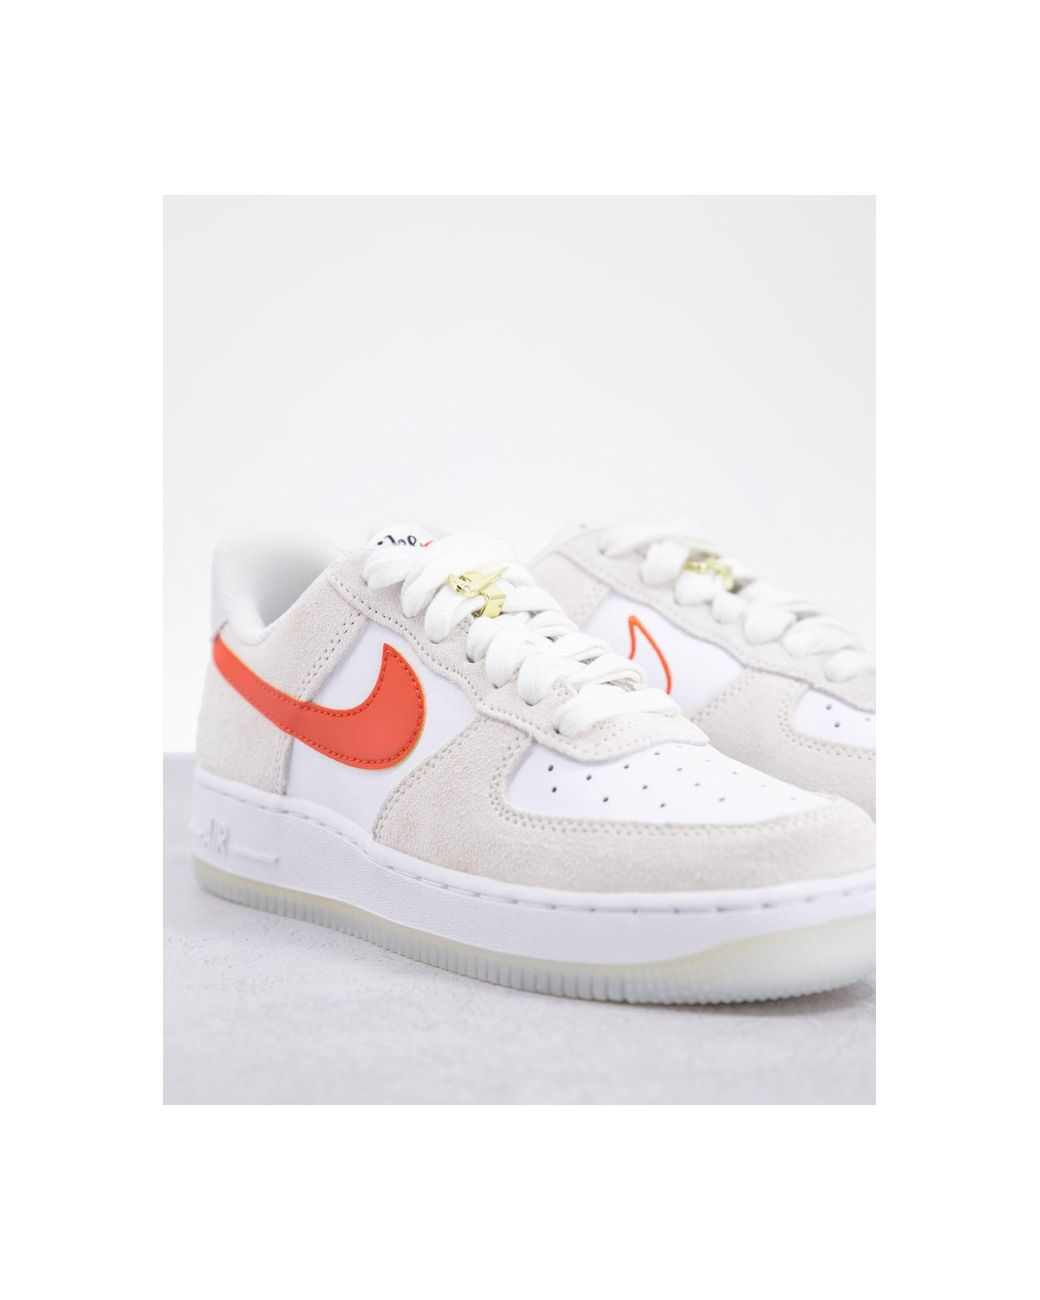 Nike Rubber Air Force 1 '07 Se S50 Sneakers in White | Lyst Australia